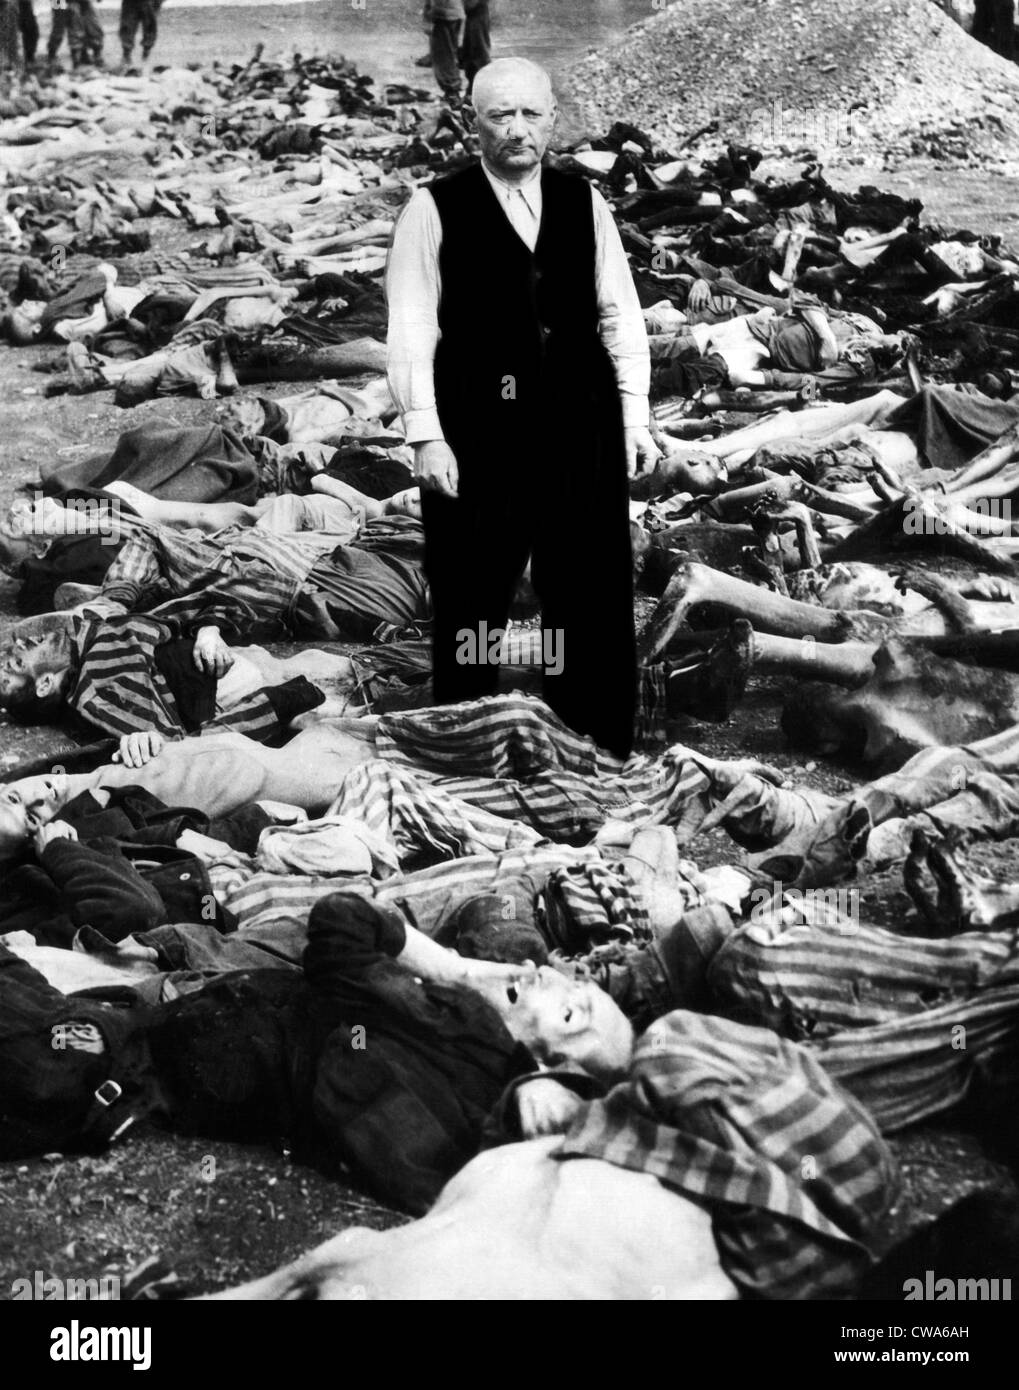 The commandant of the concentration camp in Landsberg, Germany stands amid some of the prisoners that were shot or burned as Stock Photo